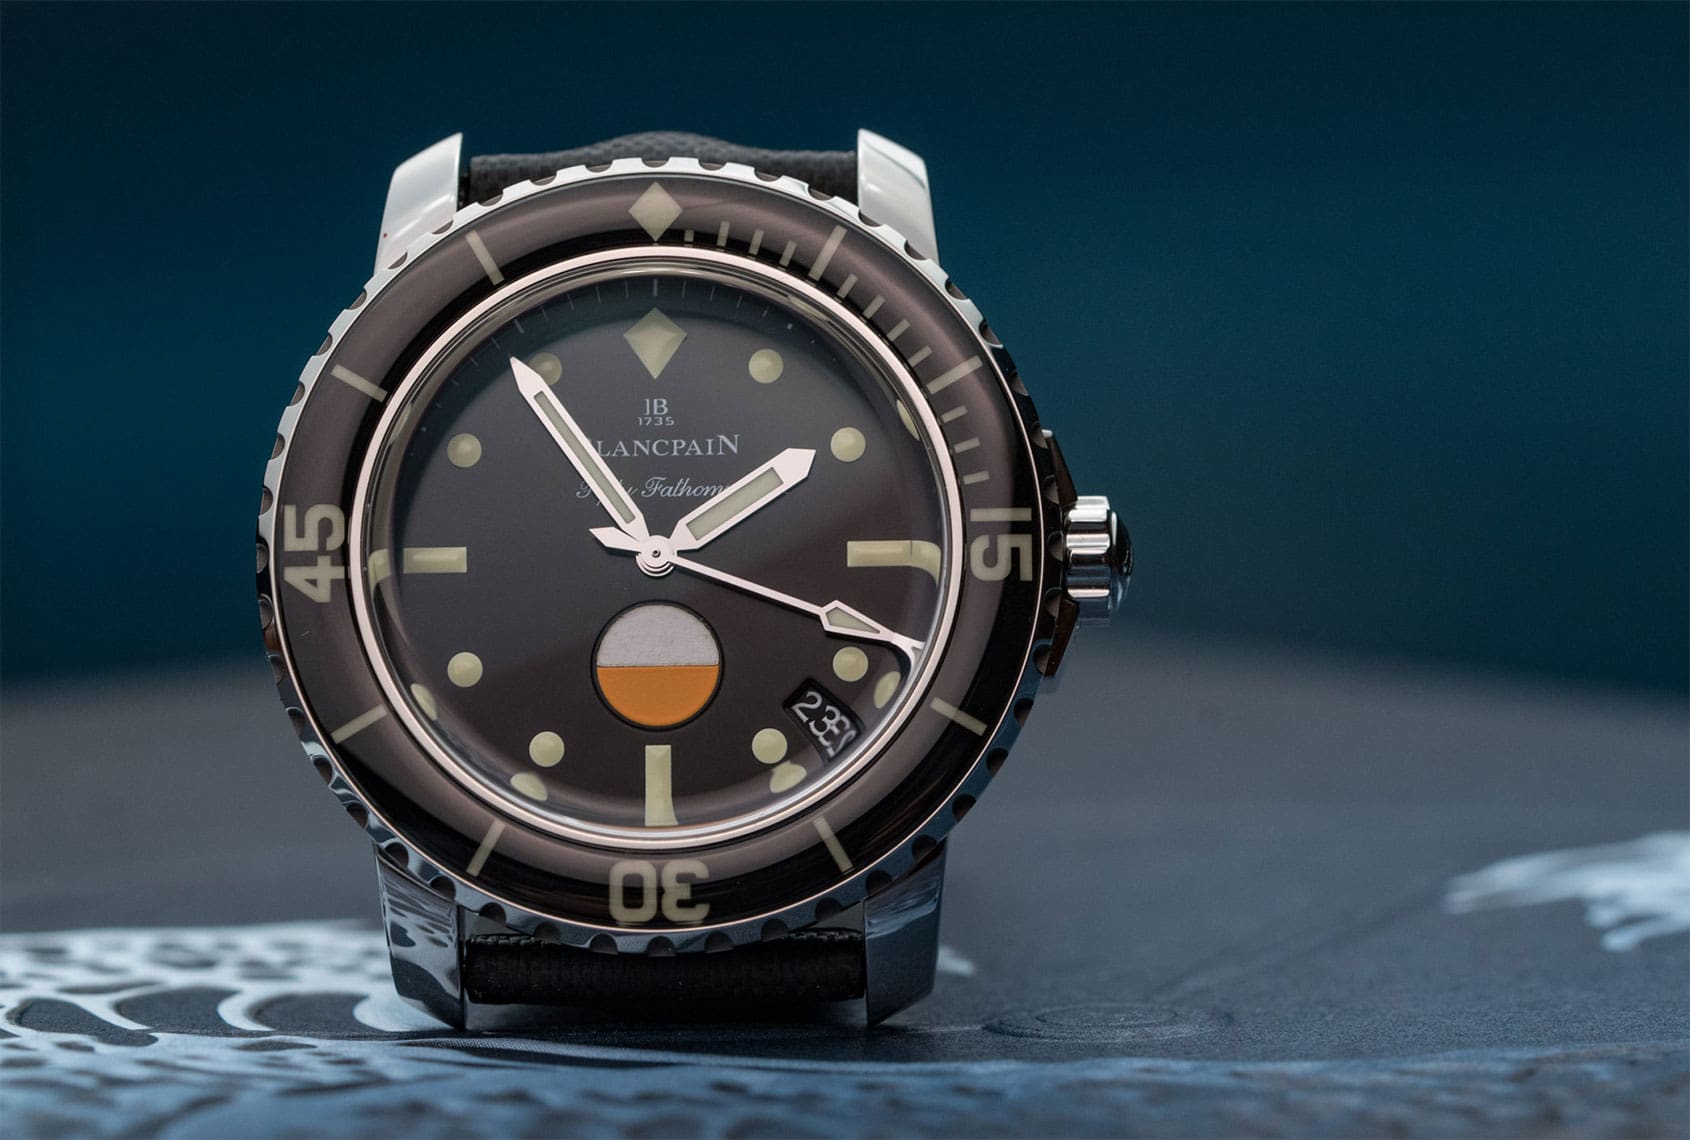 Battle ready beginnings of the Blancpain dive watch